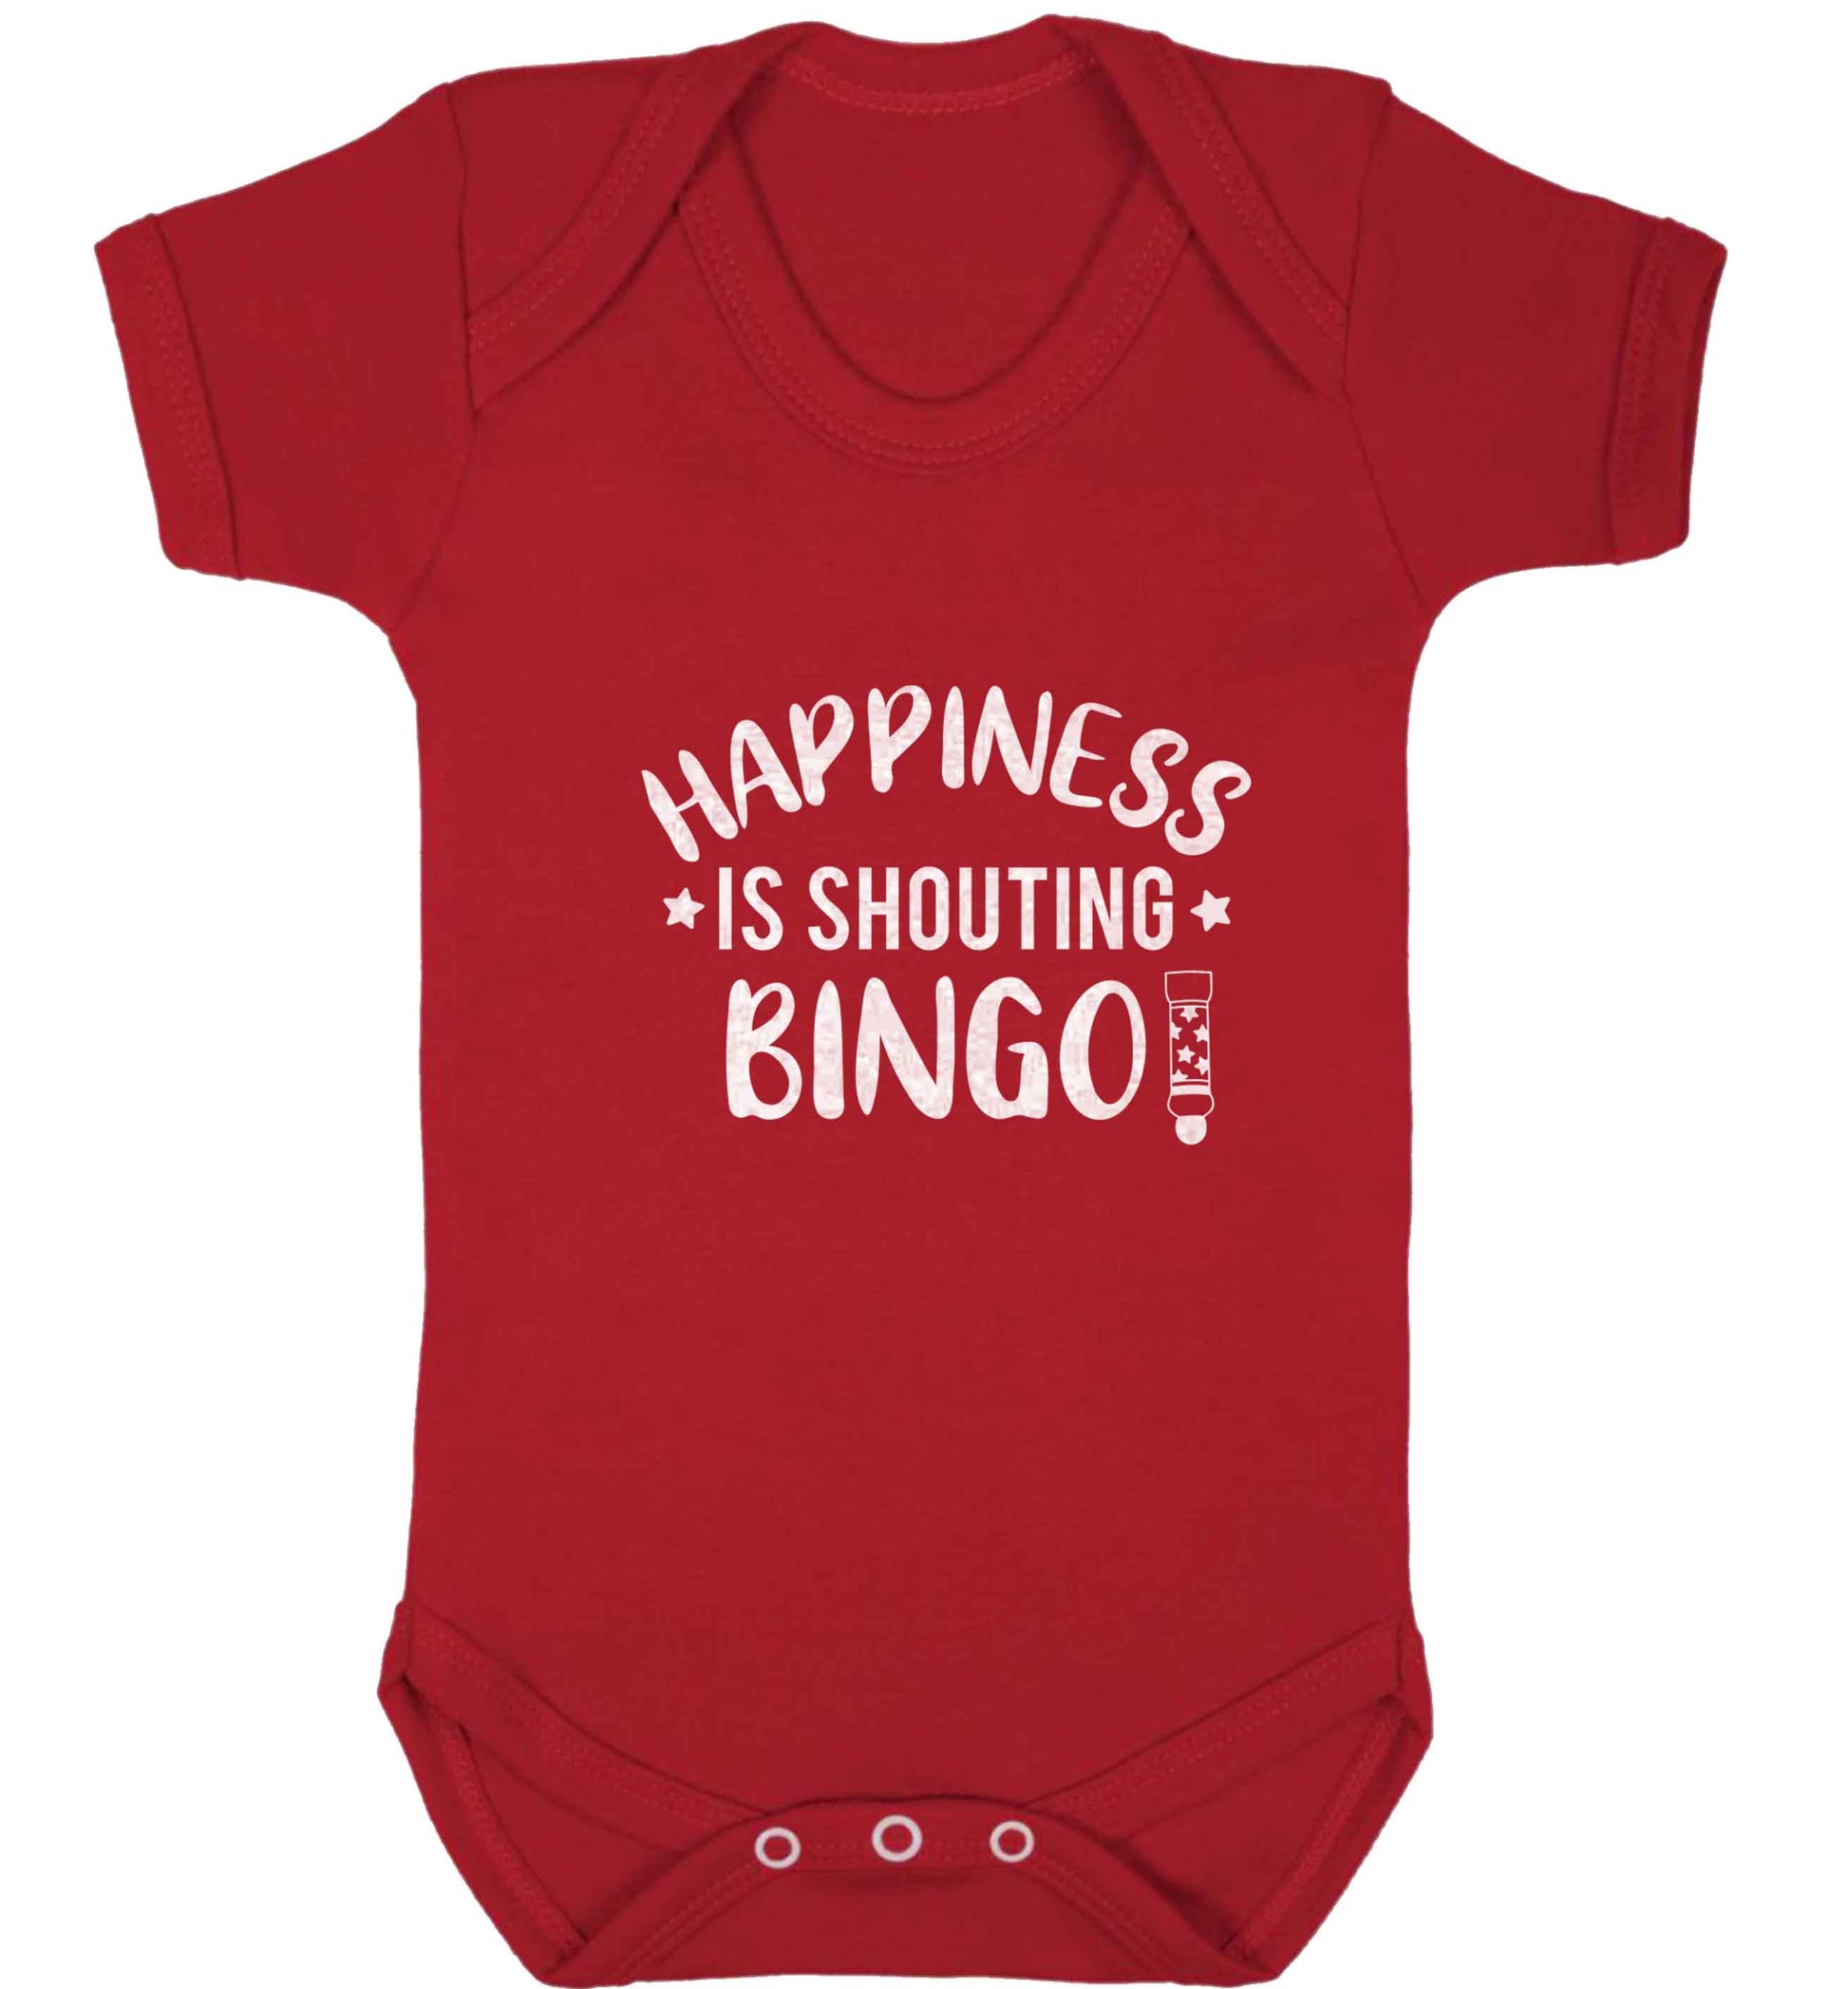 Happiness is shouting bingo! baby vest red 18-24 months